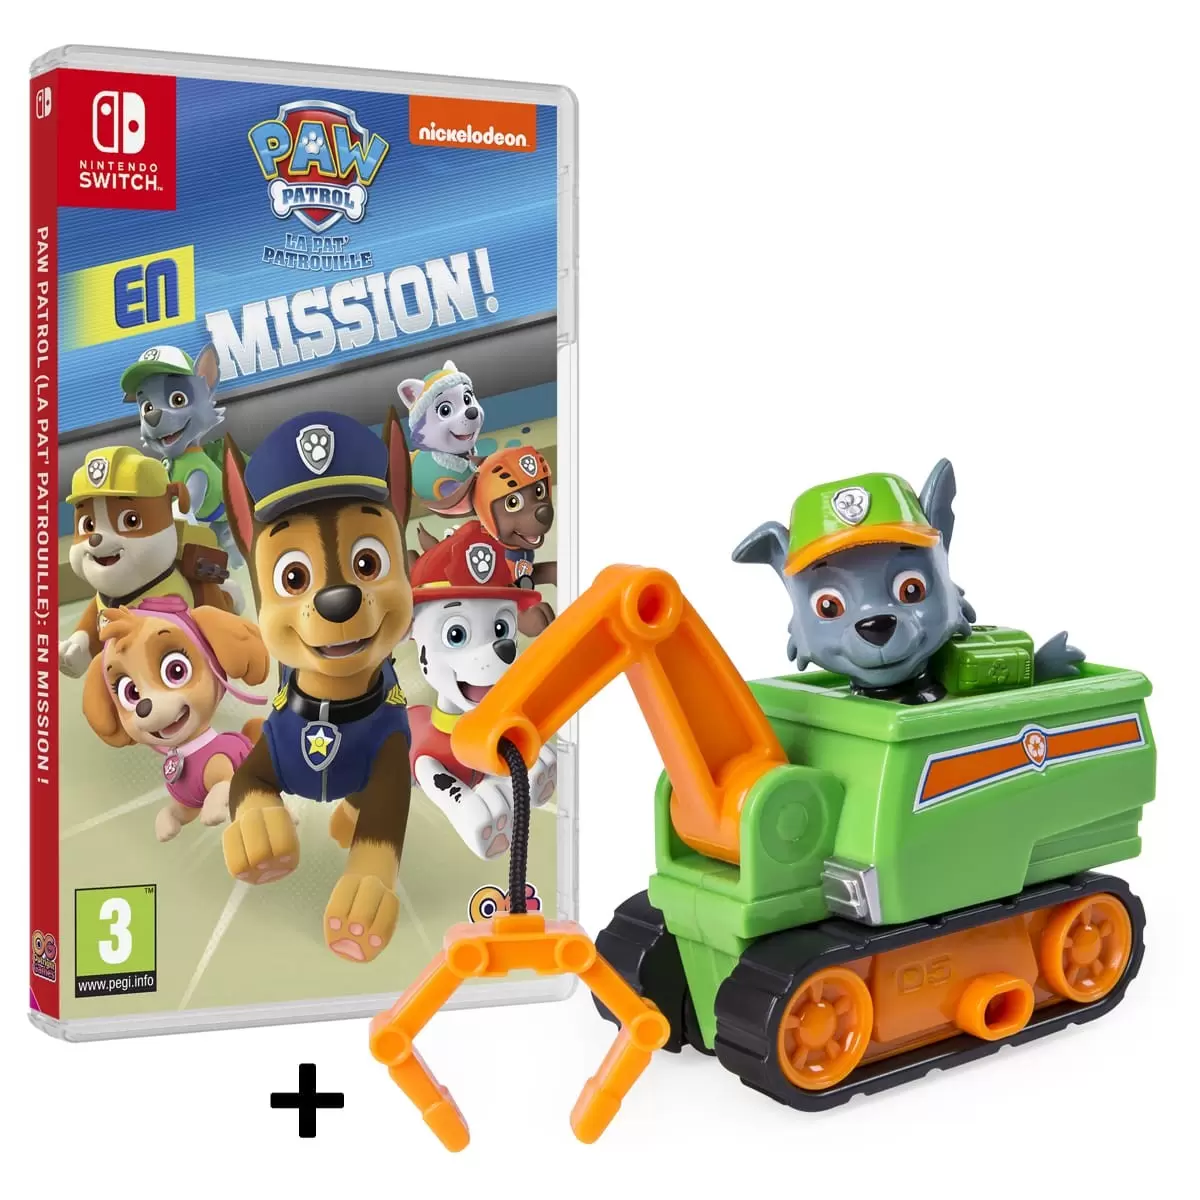 Pack Pat Patrouille + Figurine Rocky - Nintendo Switch Games